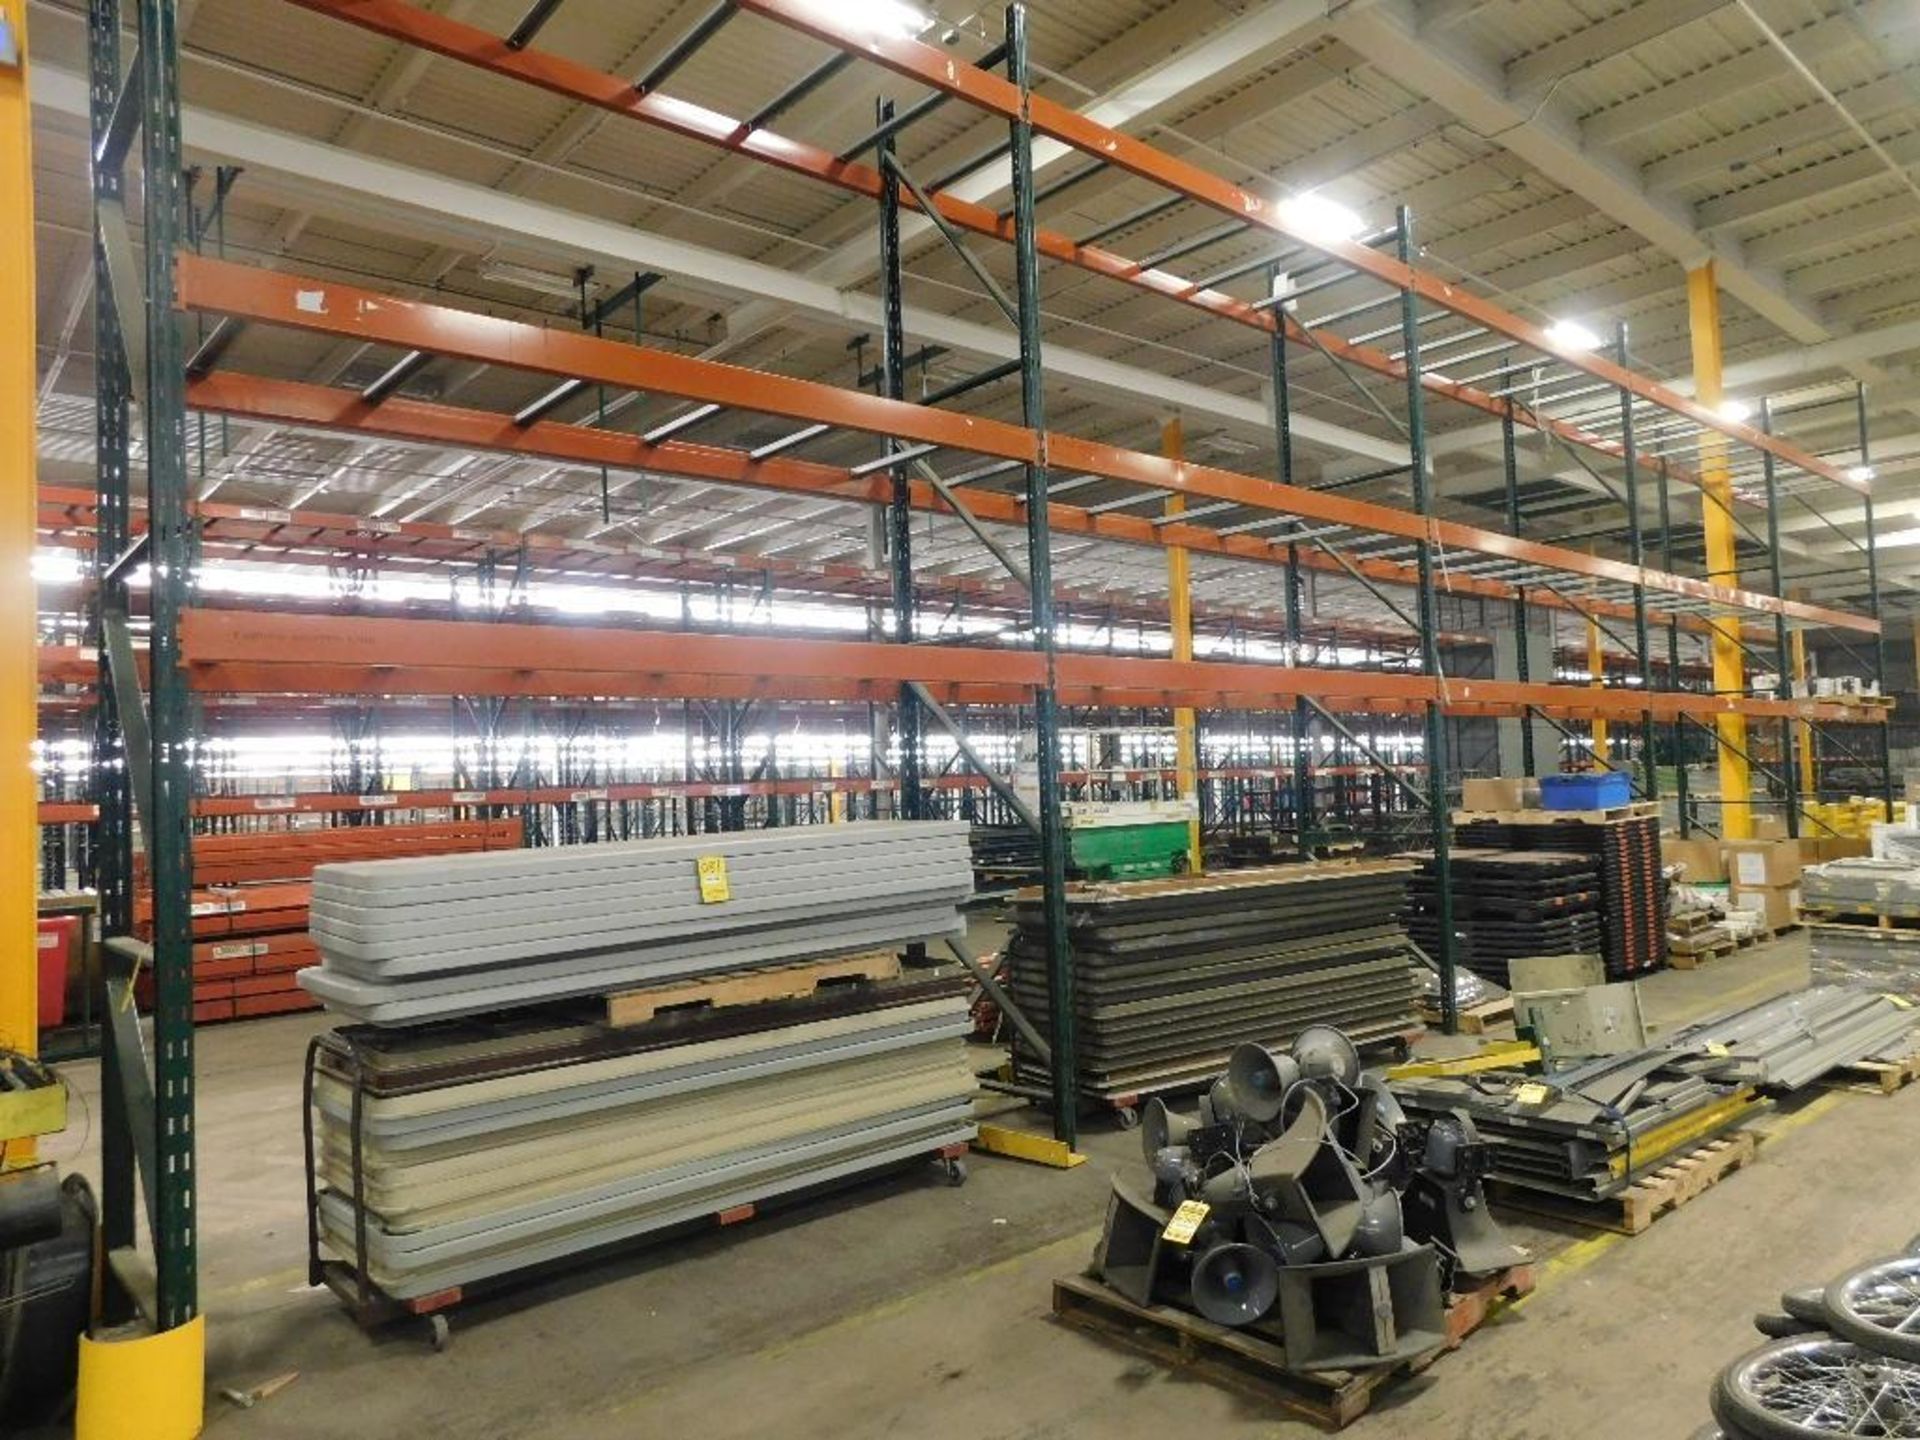 (5X) SECTIONS OF RIDG-U-RAK PALLET RACKING, (2) 20 FT. UPRIGHTS, (4) 17 FT. 4 IN. UPRIGHTS, (30) 5 1